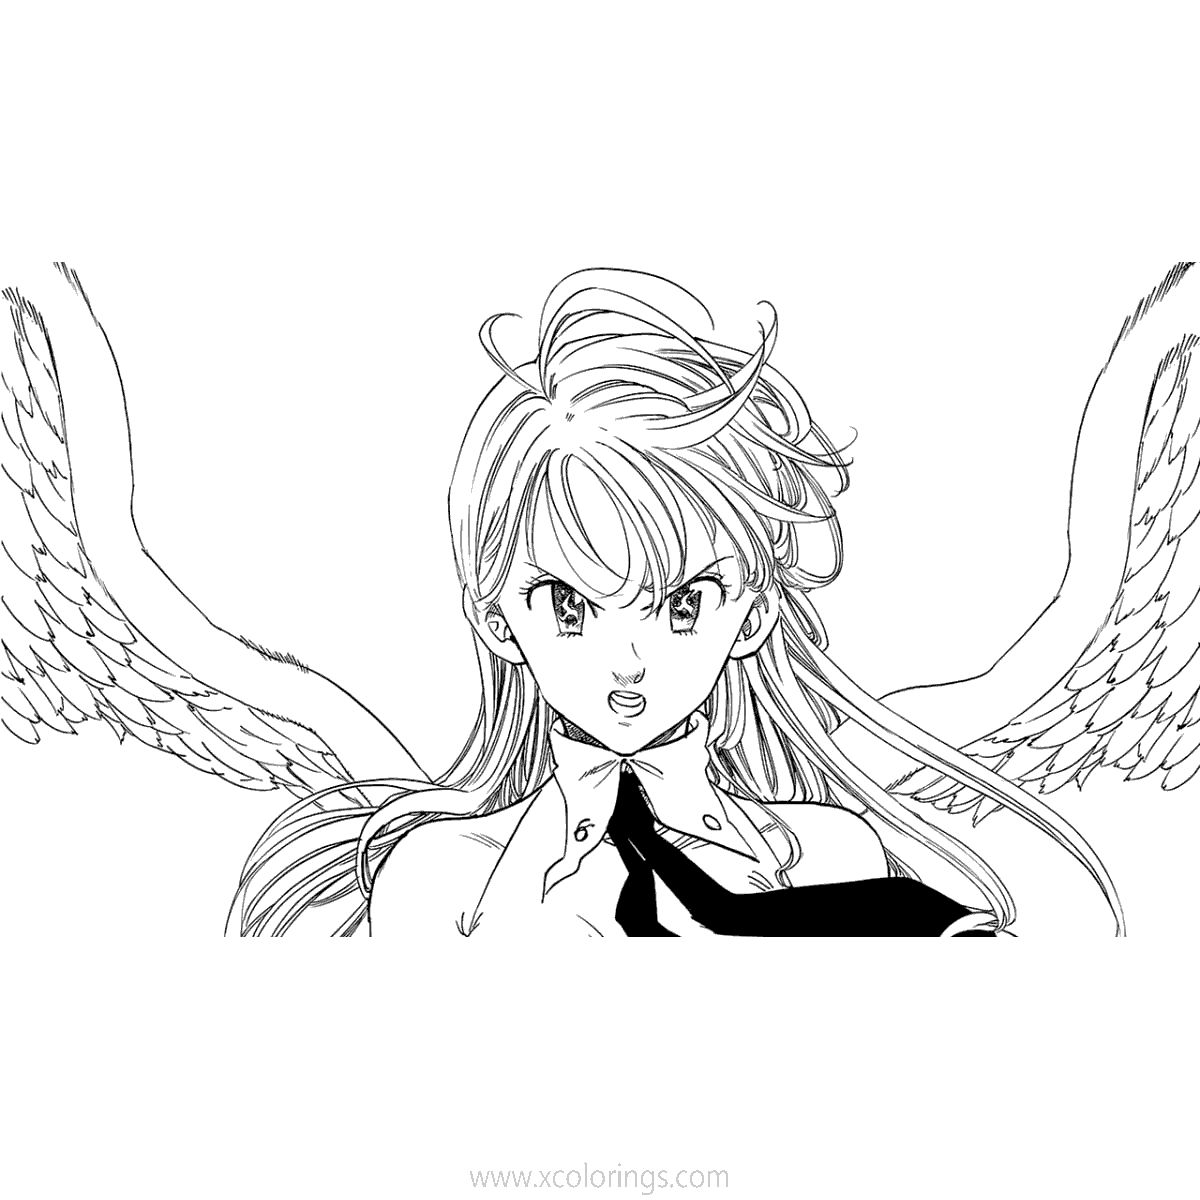 Free The Seven Deadly Sins Coloring Pages Elizabeth printable